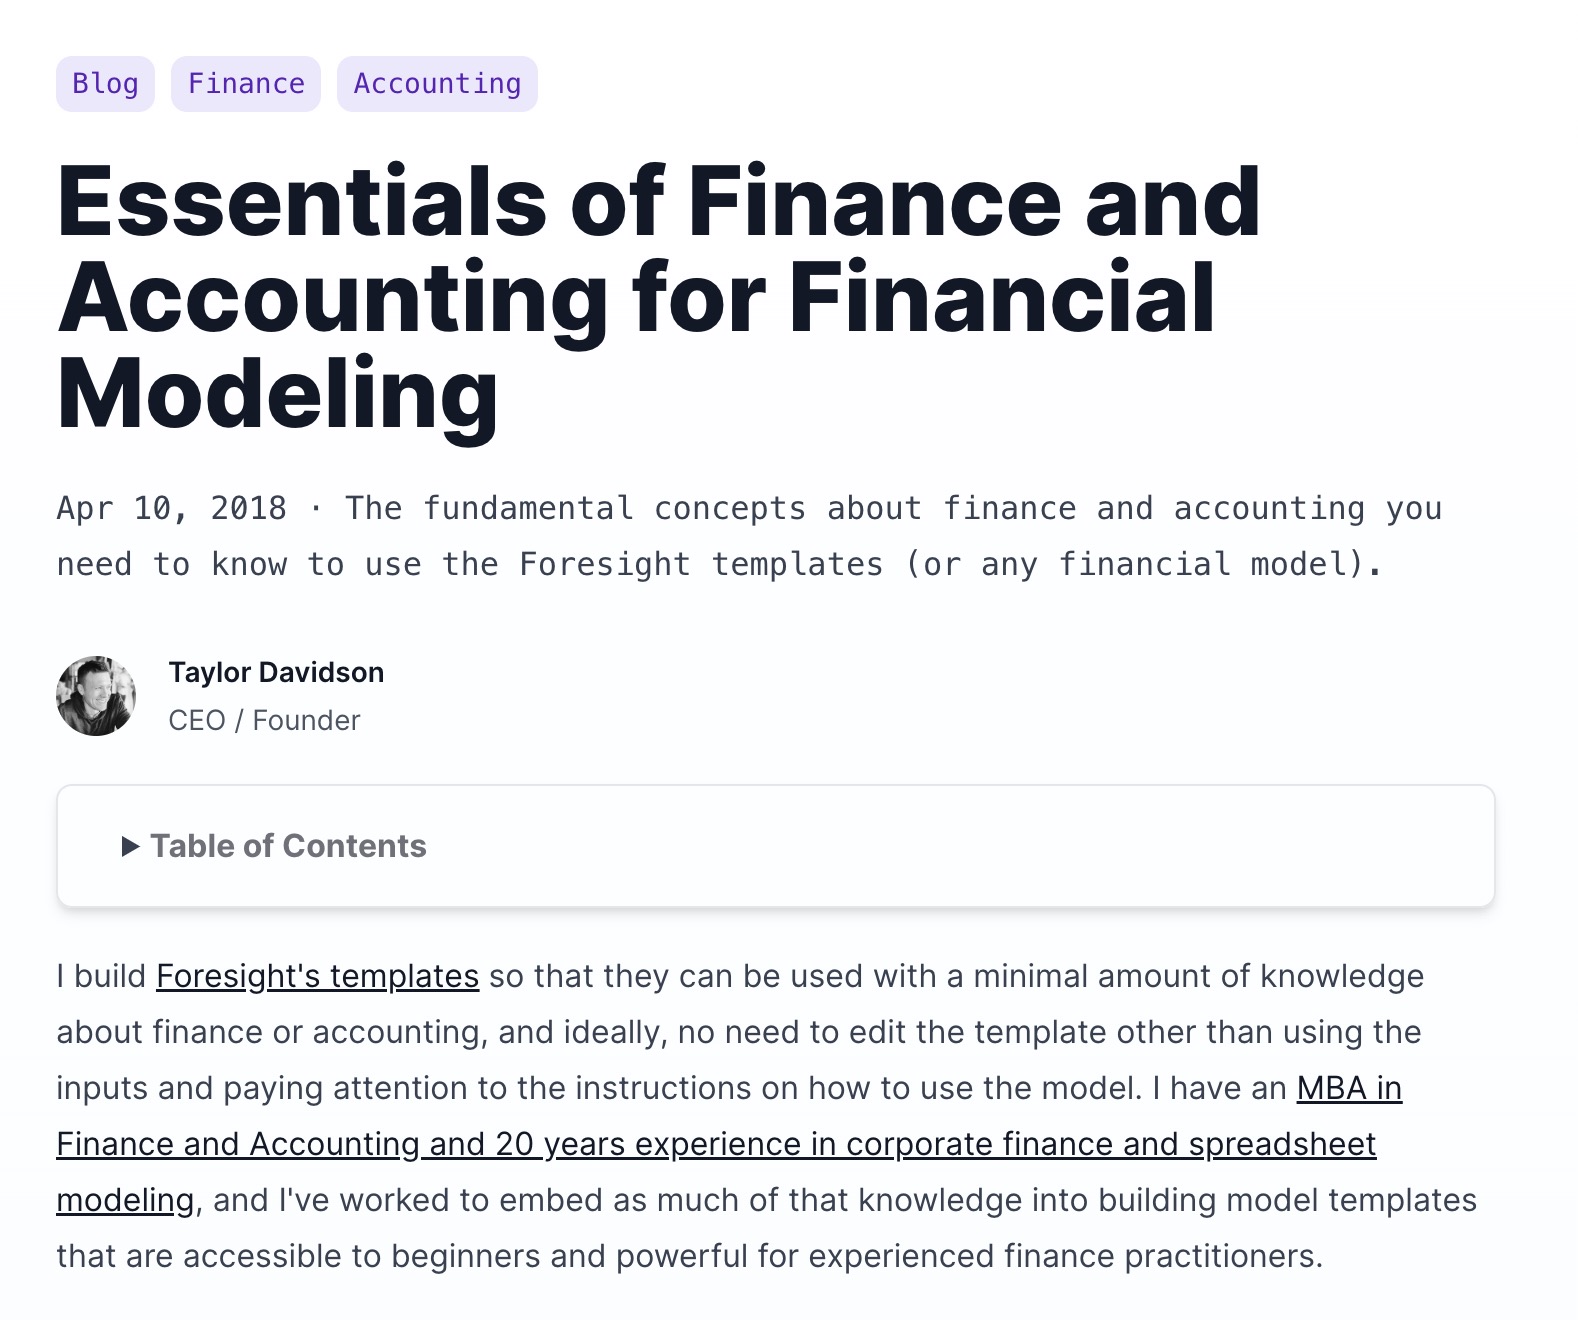 Essentials of Finance and Accounting for Financial Modeling